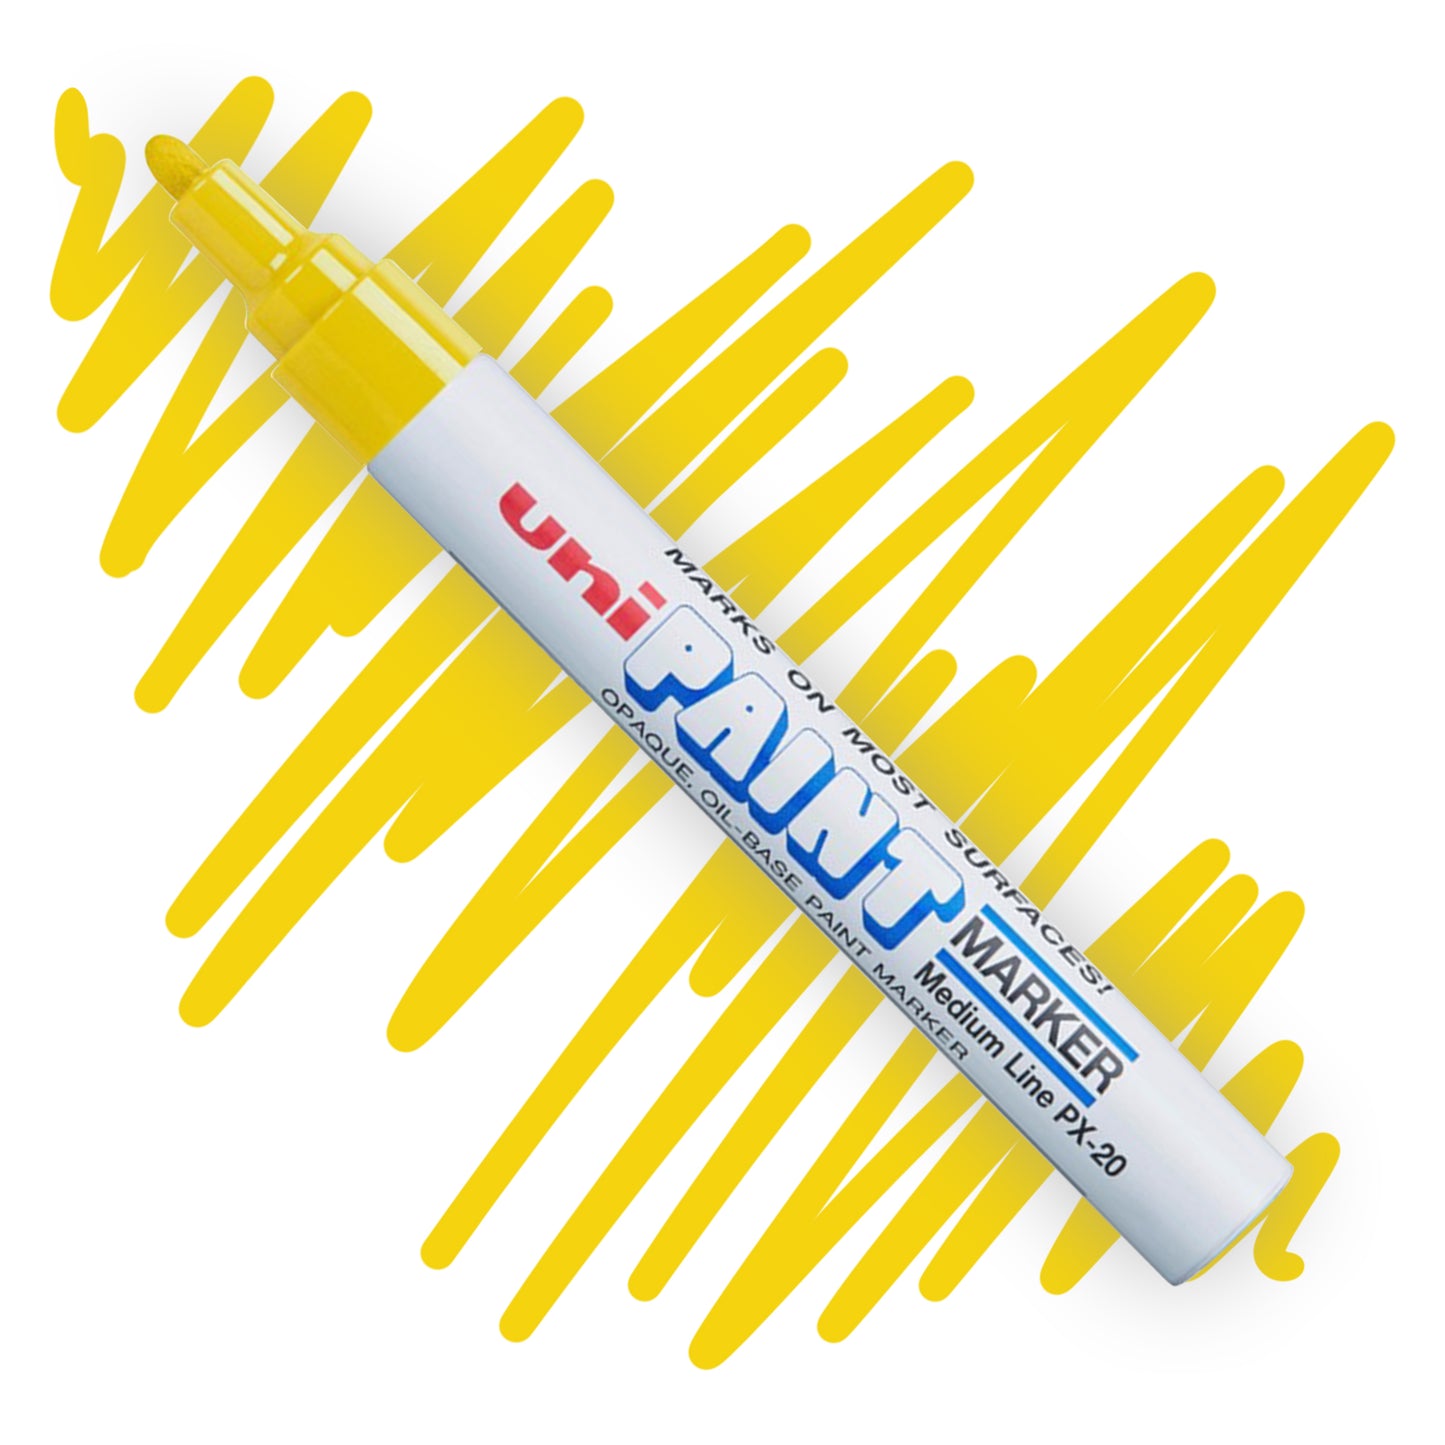 A white marker angled diagonally, the tip of the marker and the nib are colored yellow. On the marker body the label reads "Uni PAINT Maker". Behind the marker is a color swatch of a squiggly line in yellow..